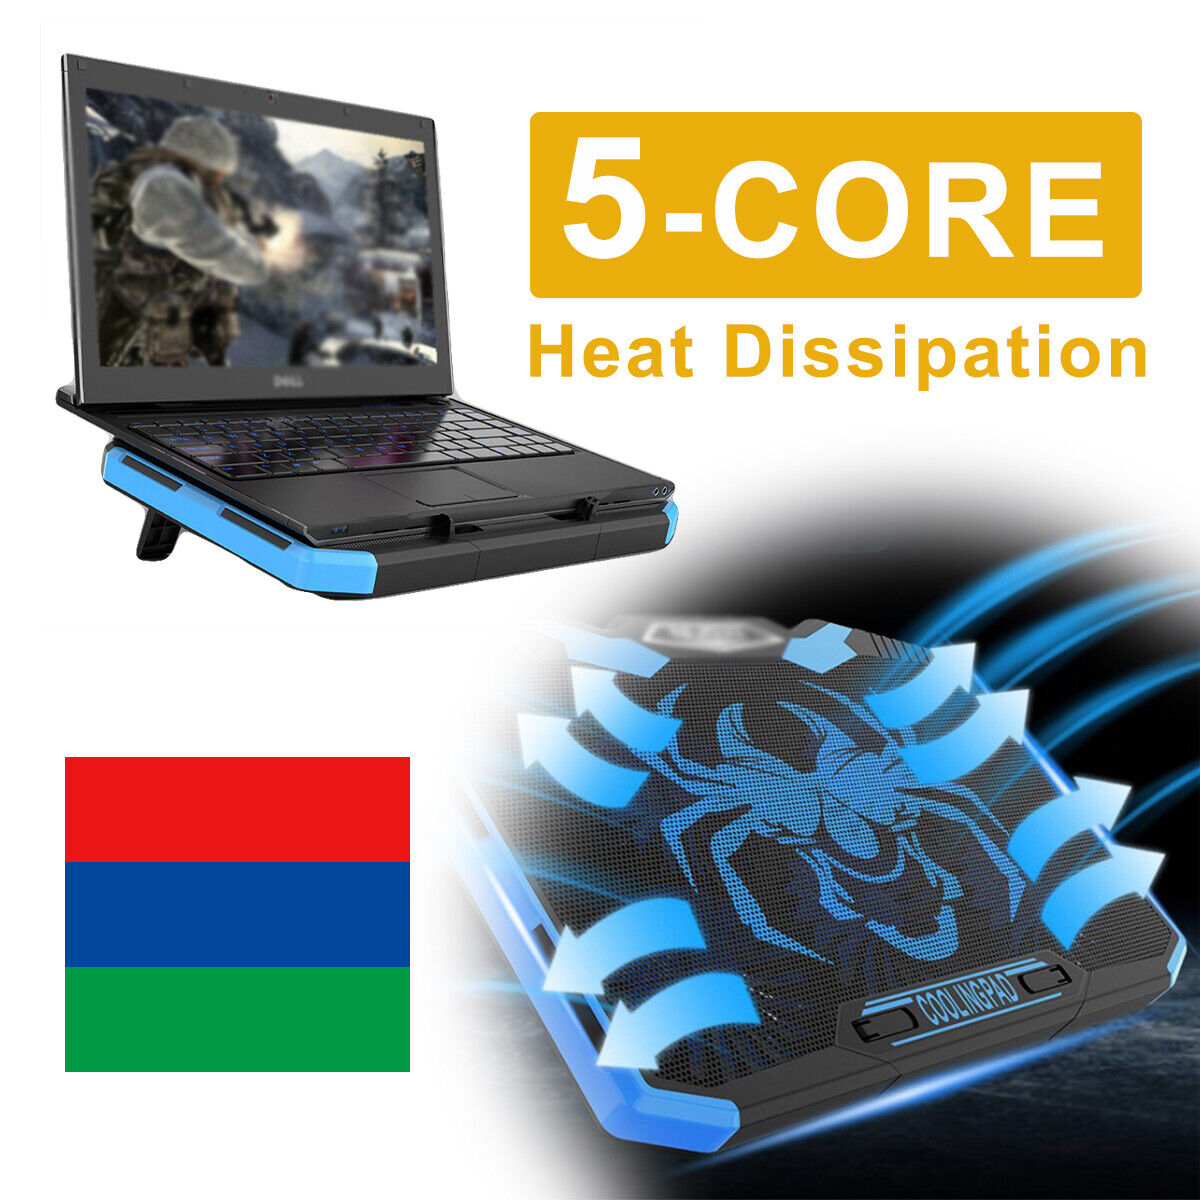 11-17 inch Gaming Laptop Cooler Notebook Cooling Pad W/ 5 Blue LED Fans Dual USB Unbranded Does not apply